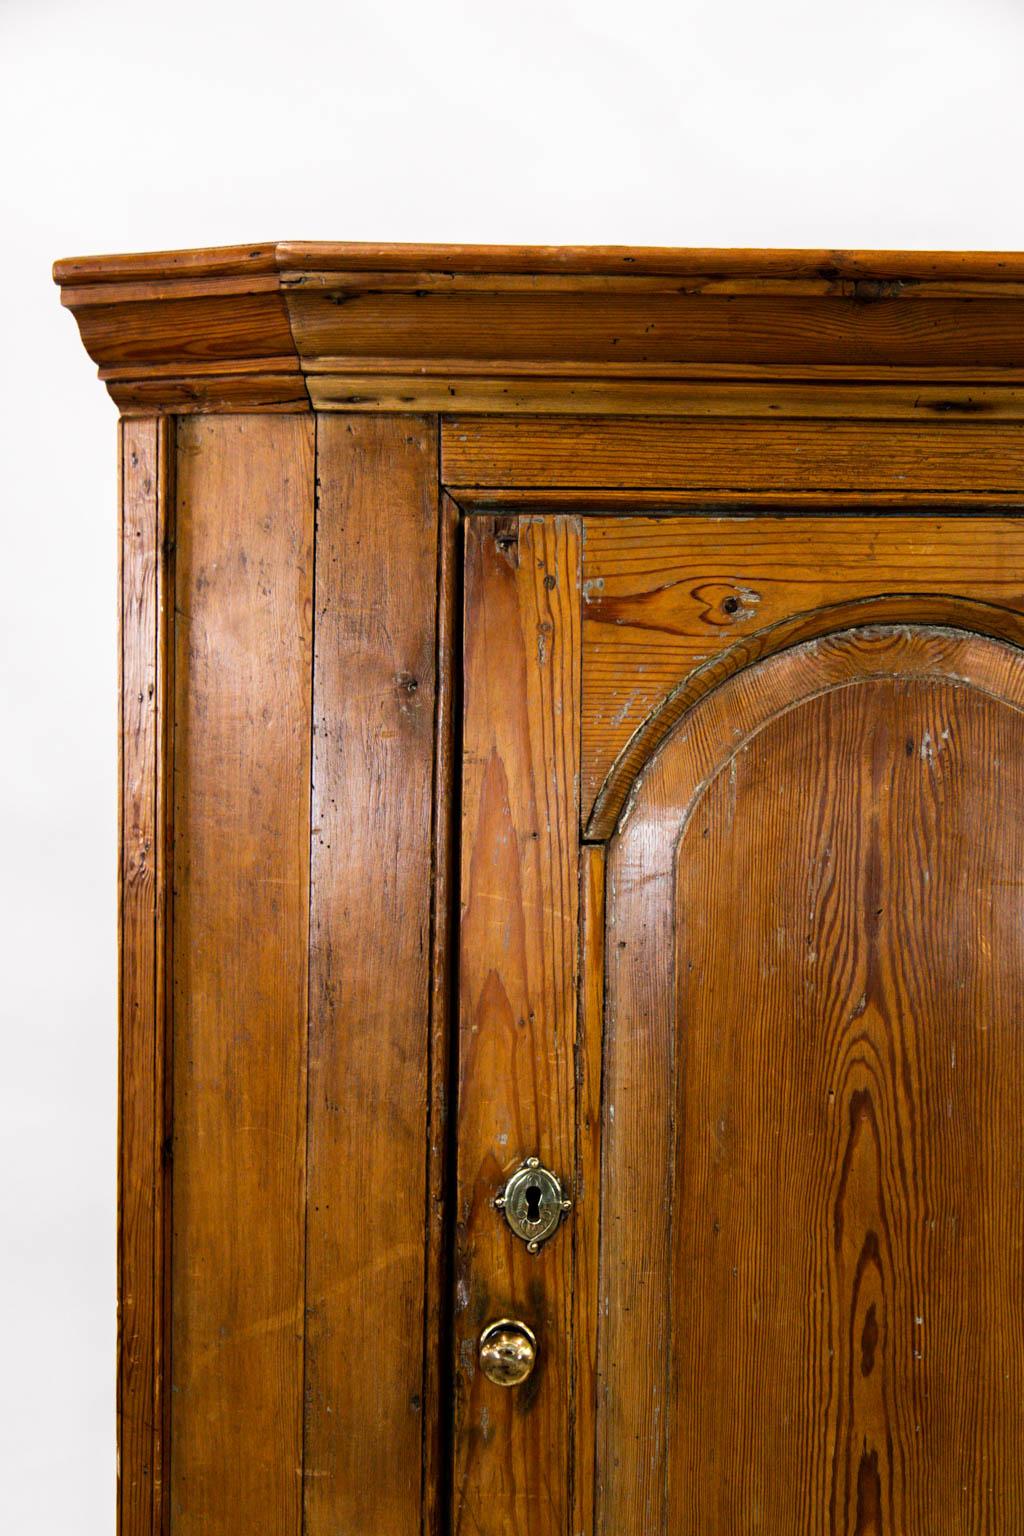 This English corner cupboard has a double raised panel door and exposed peg construction. The door is framed with simulated bead molding. The interior has four concave shaped shelves.